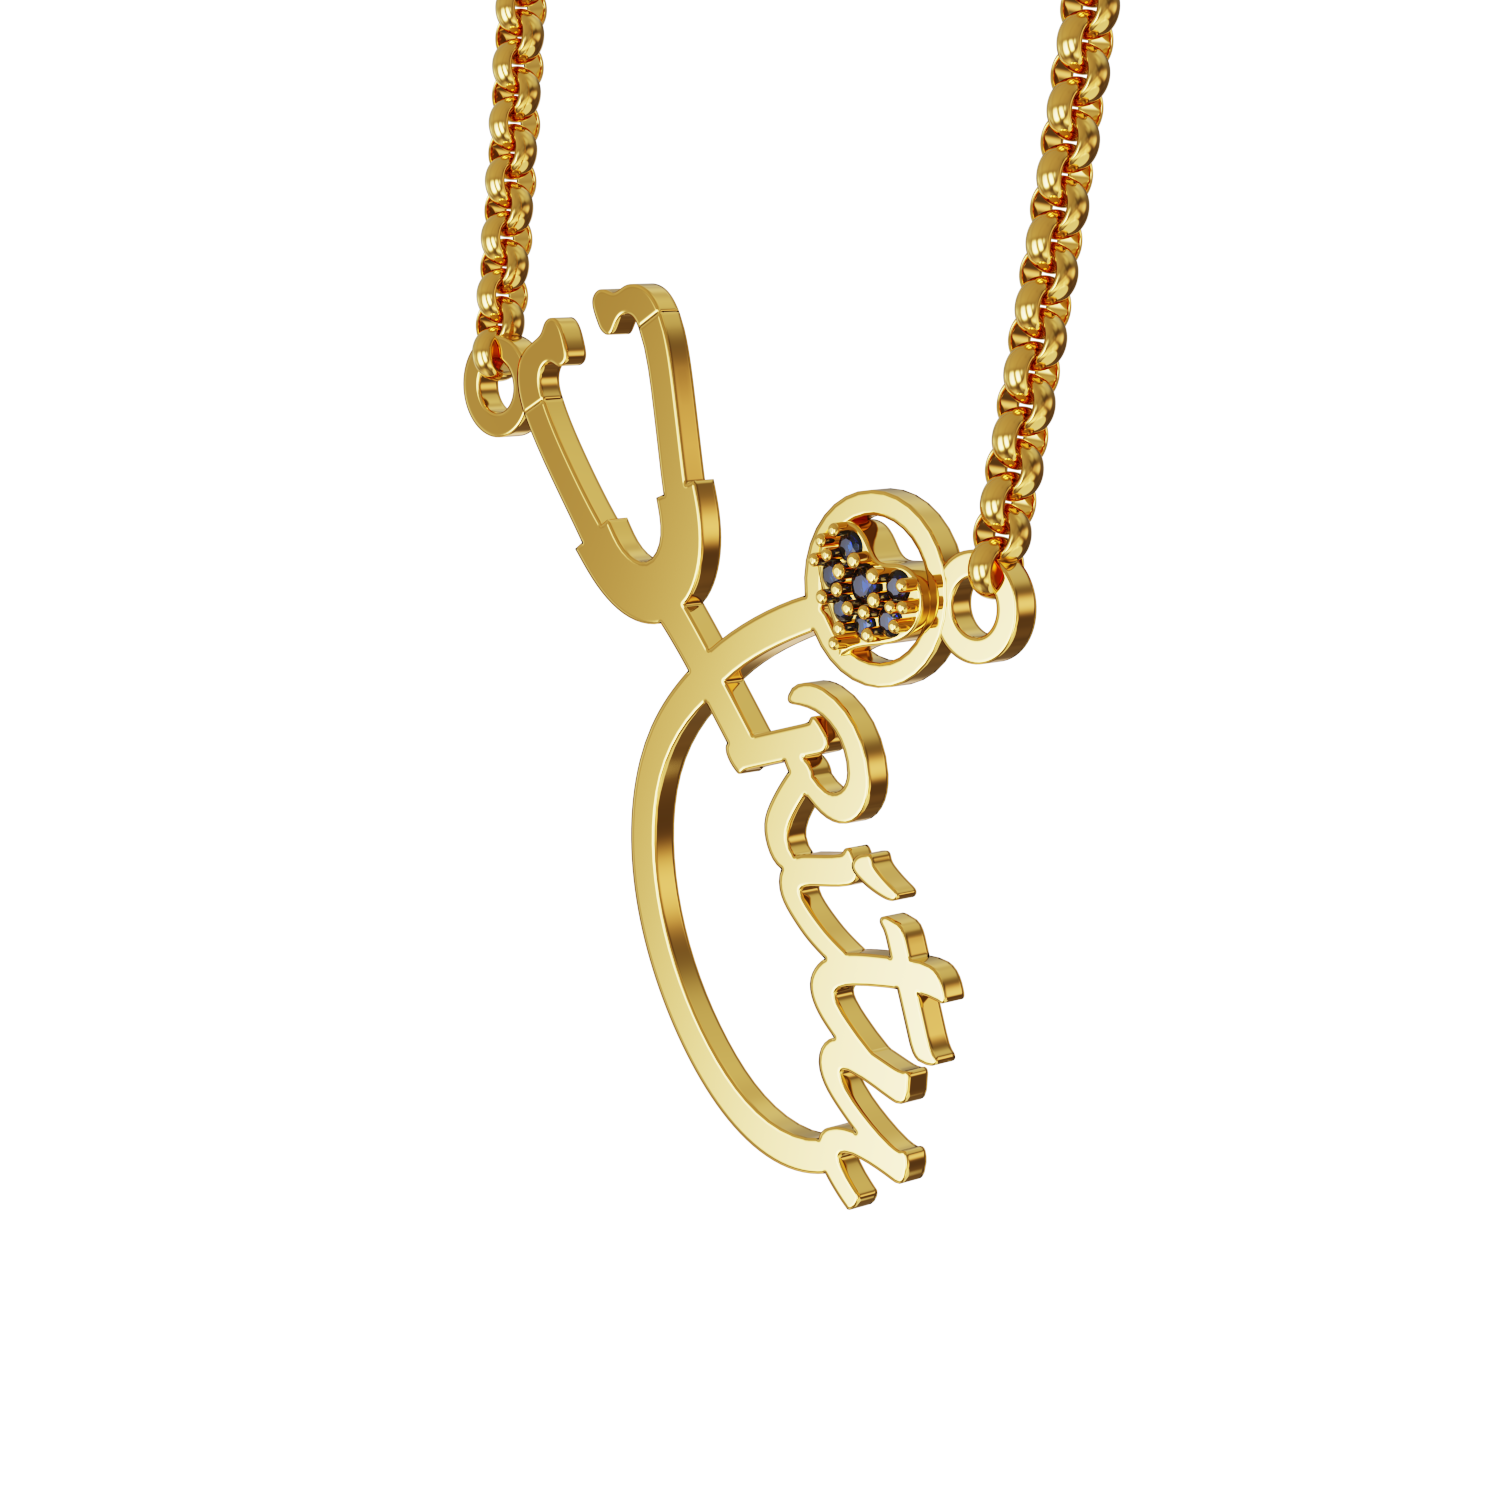 Customized-Gold-Pendant-for-Doctor